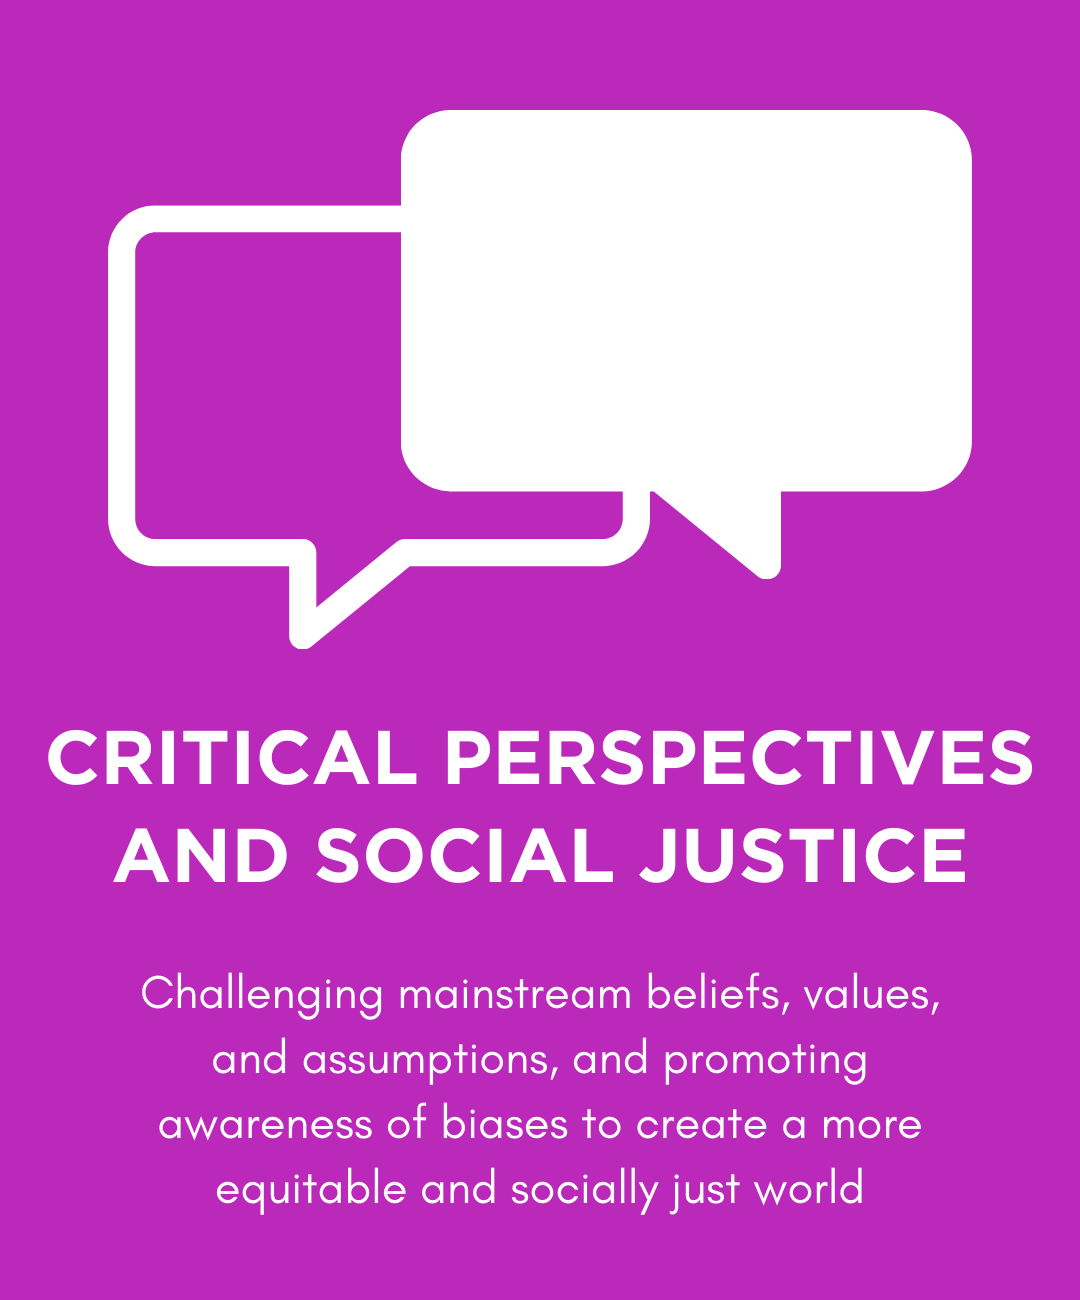 Critical Perspectives and Social Justice